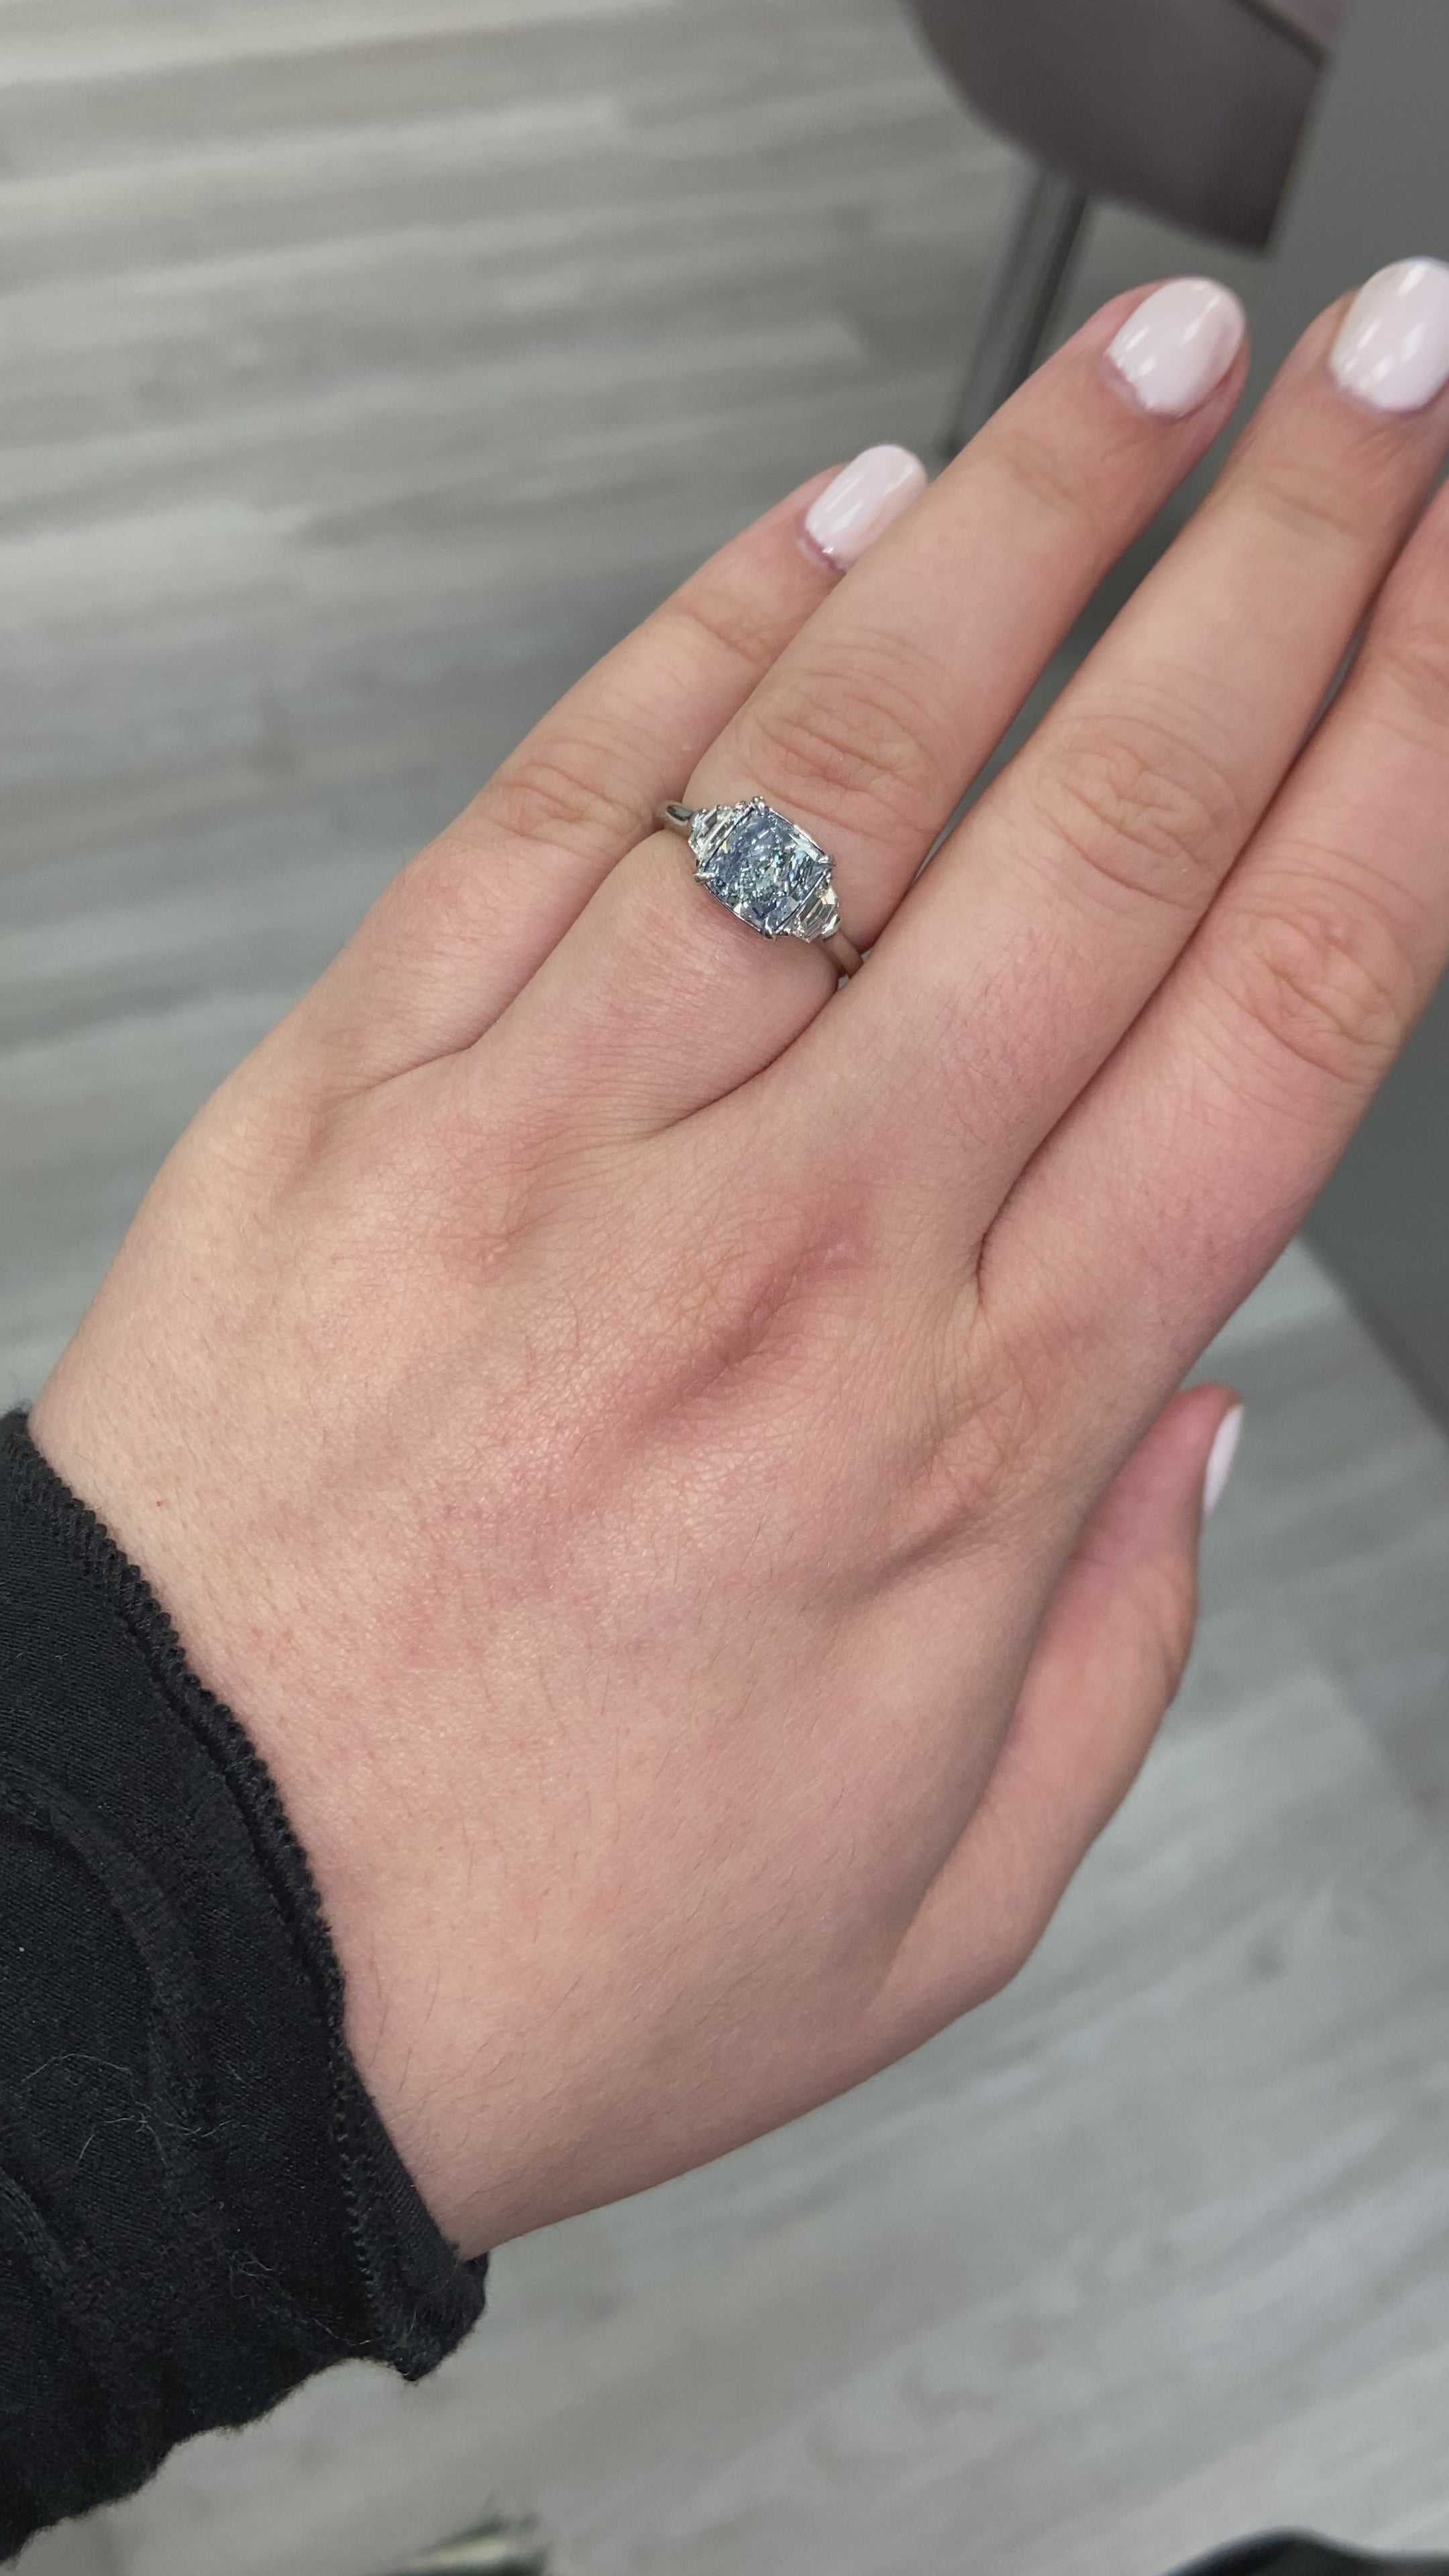 3 stone engagement ring with natural green oval diamond : r/EngagementRings